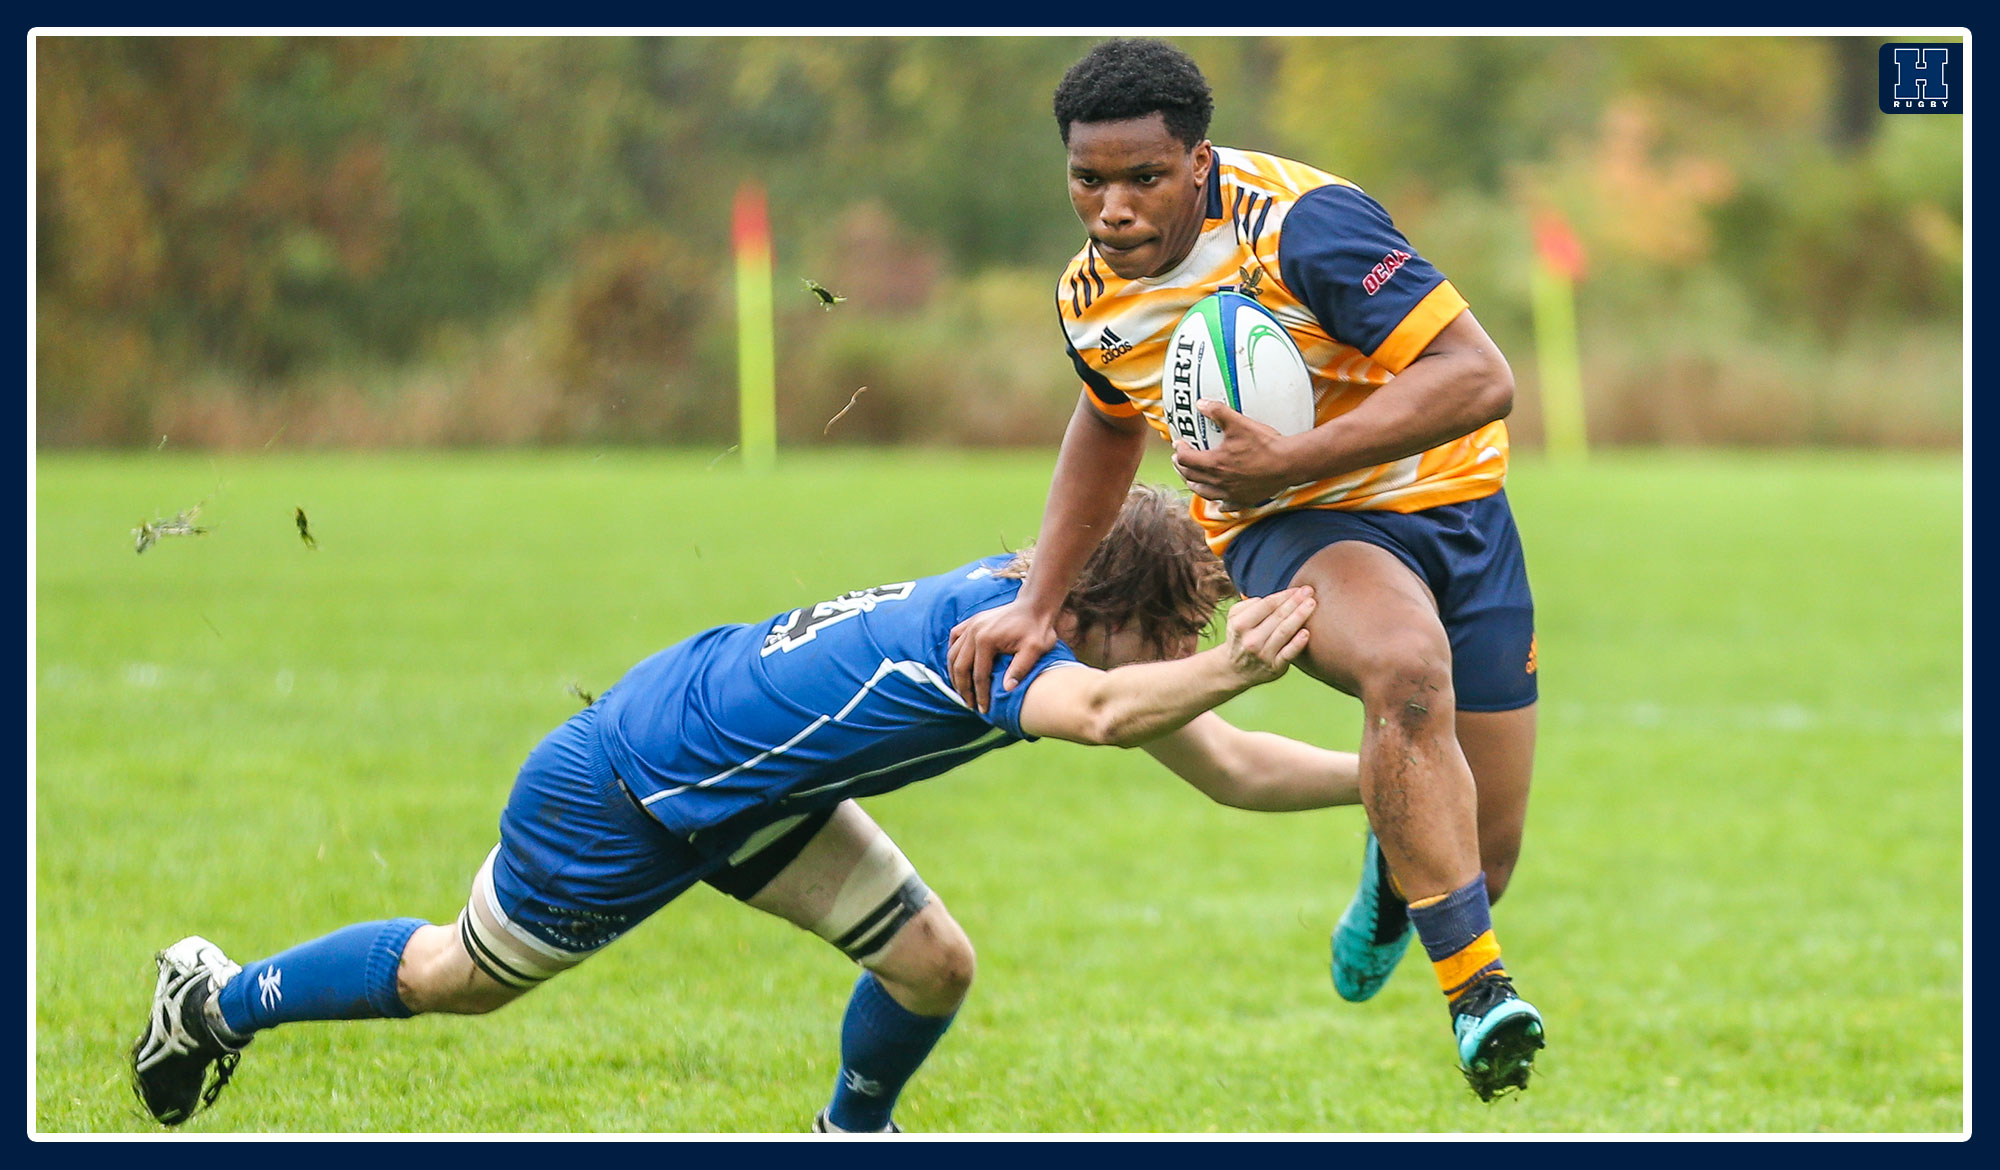 Humber rugby stiff arms a player 